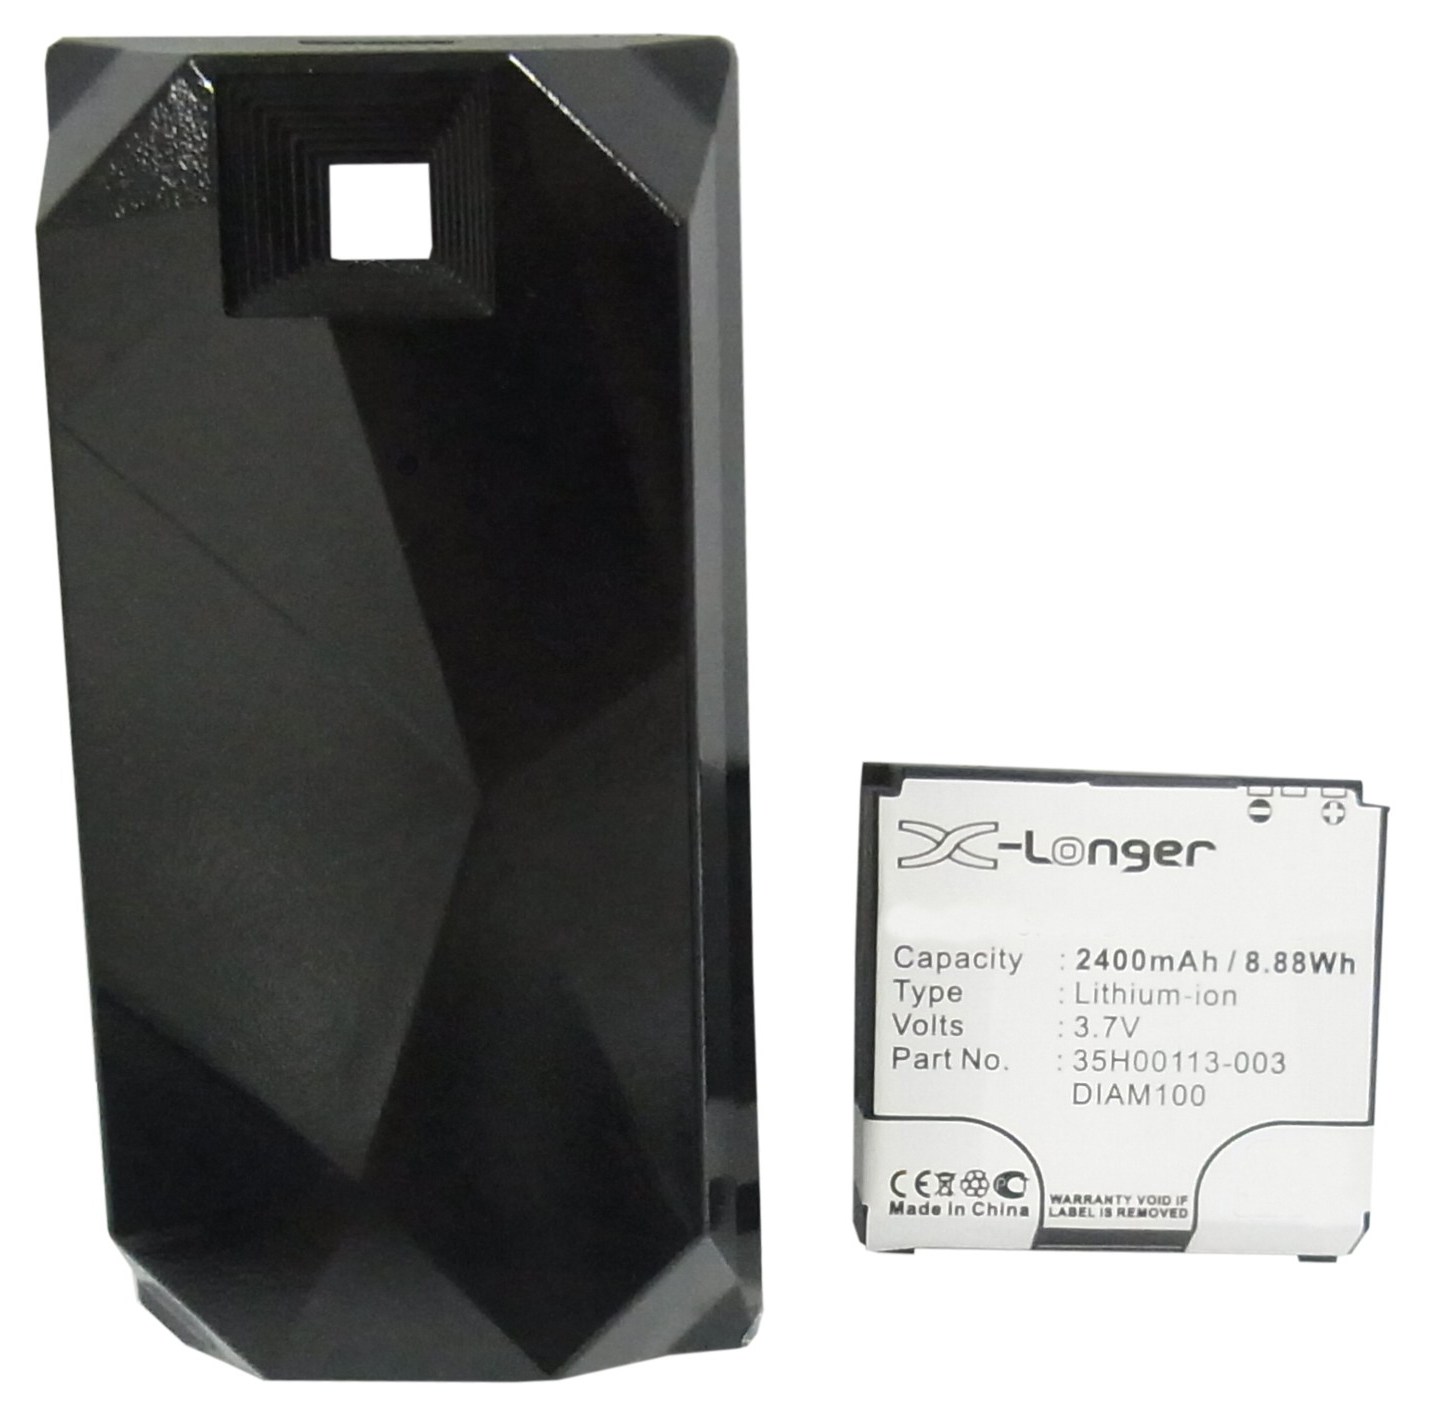 Synergy Digital Battery Compatible With Dopod 35H00113-003 Cellphone Battery - (Li-Ion, 3.7V, 2400 mAh / 8.88Wh)